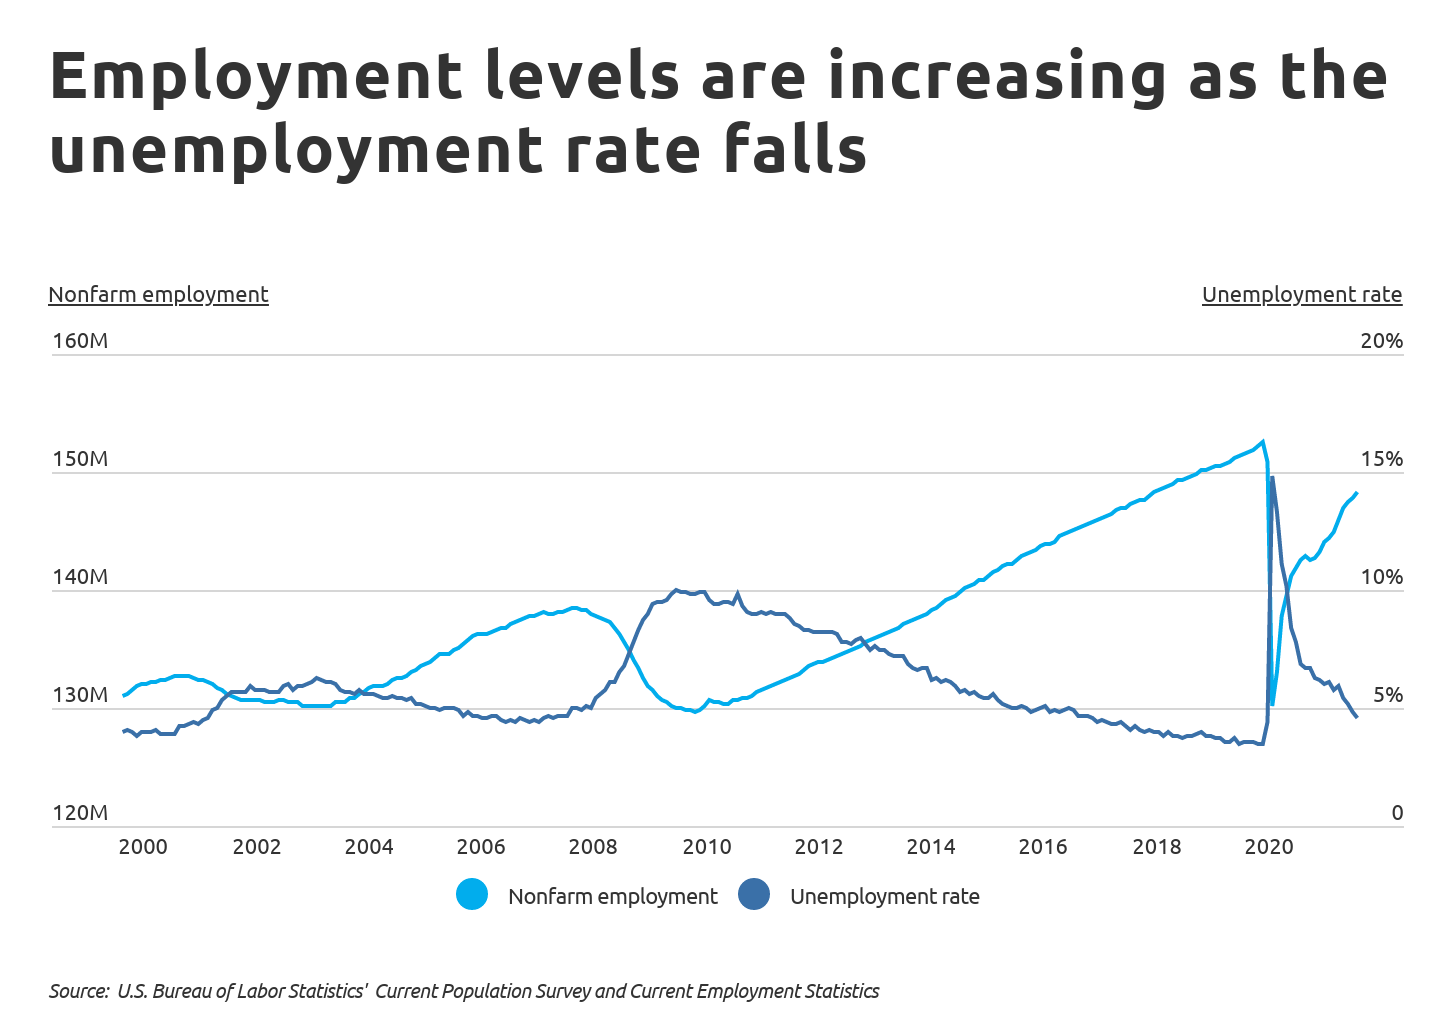 Employment levels are increasing as the unemployment rate falls